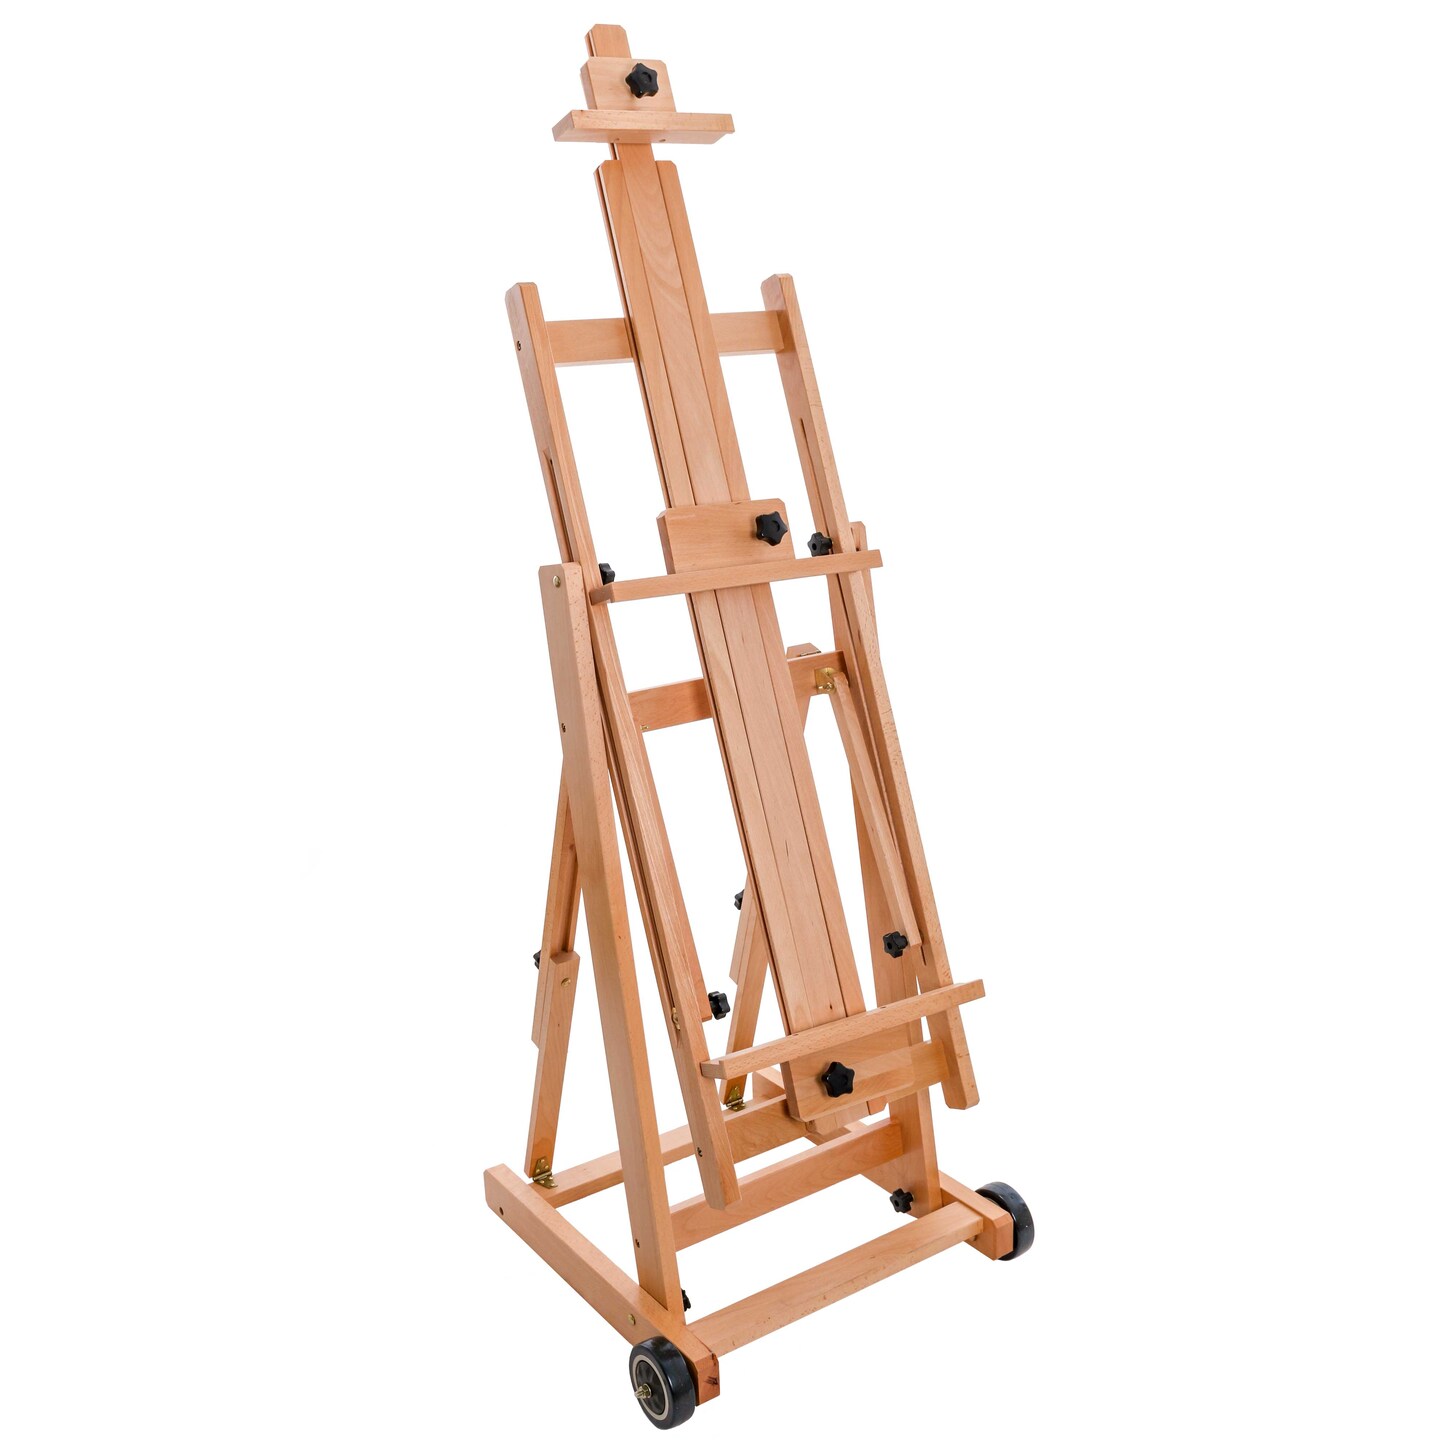 ArtRight Easel 2 feet (24 inch) Stand for Canvas – Wooden Easel Painting  Canvas Stand Display Stand for Artists, Painting, Holding Pictures, Display  and Advertisements – Best Art Supplies Store Online Buy